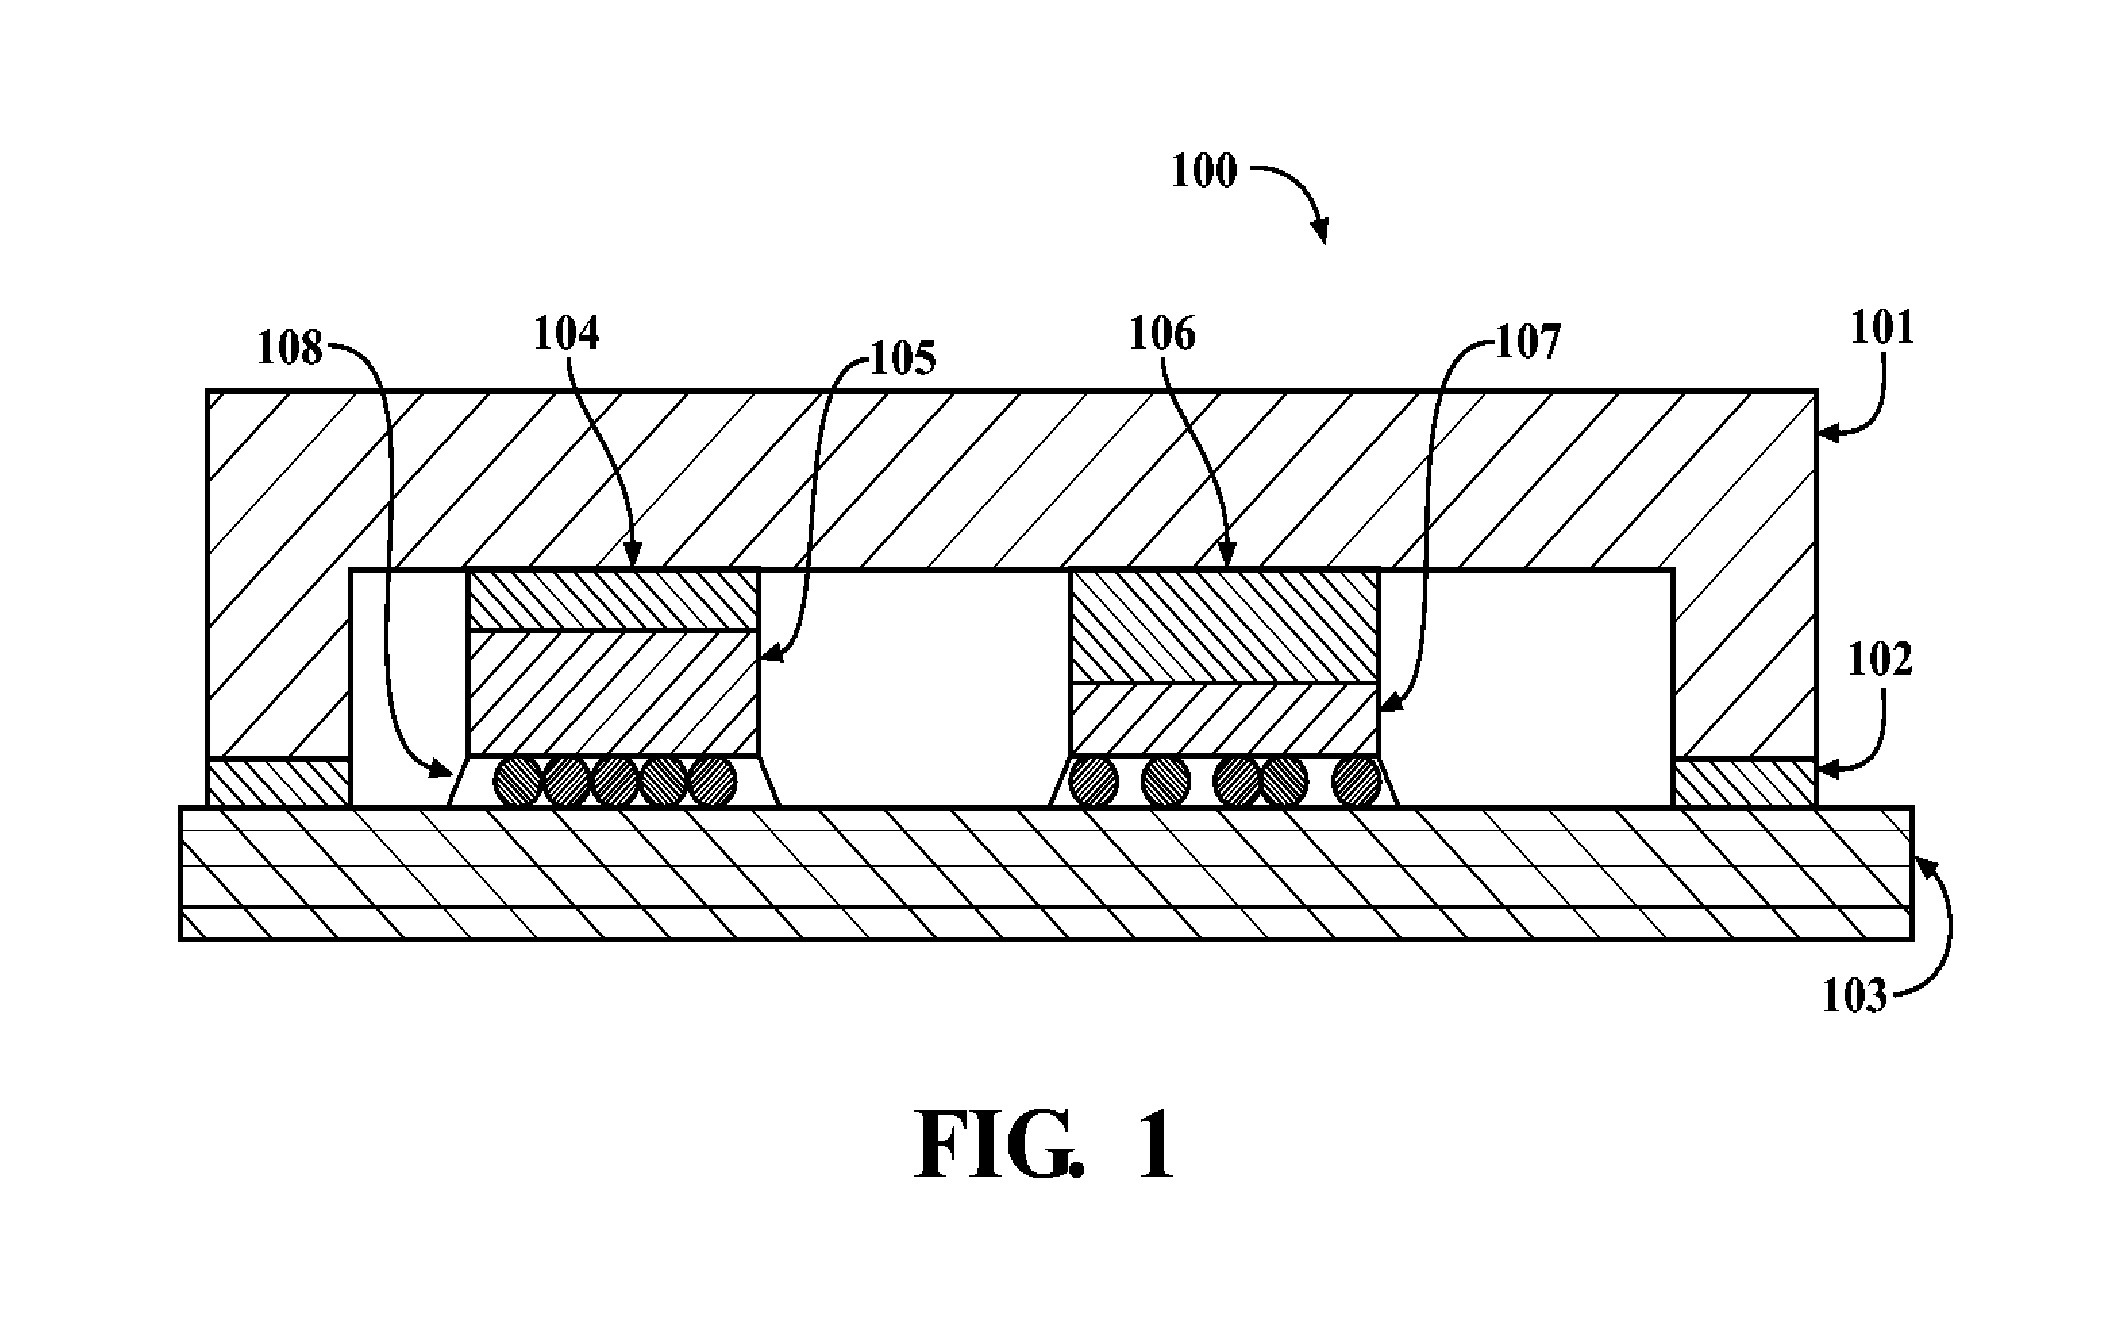 Method of Fabricating an Electronic Device